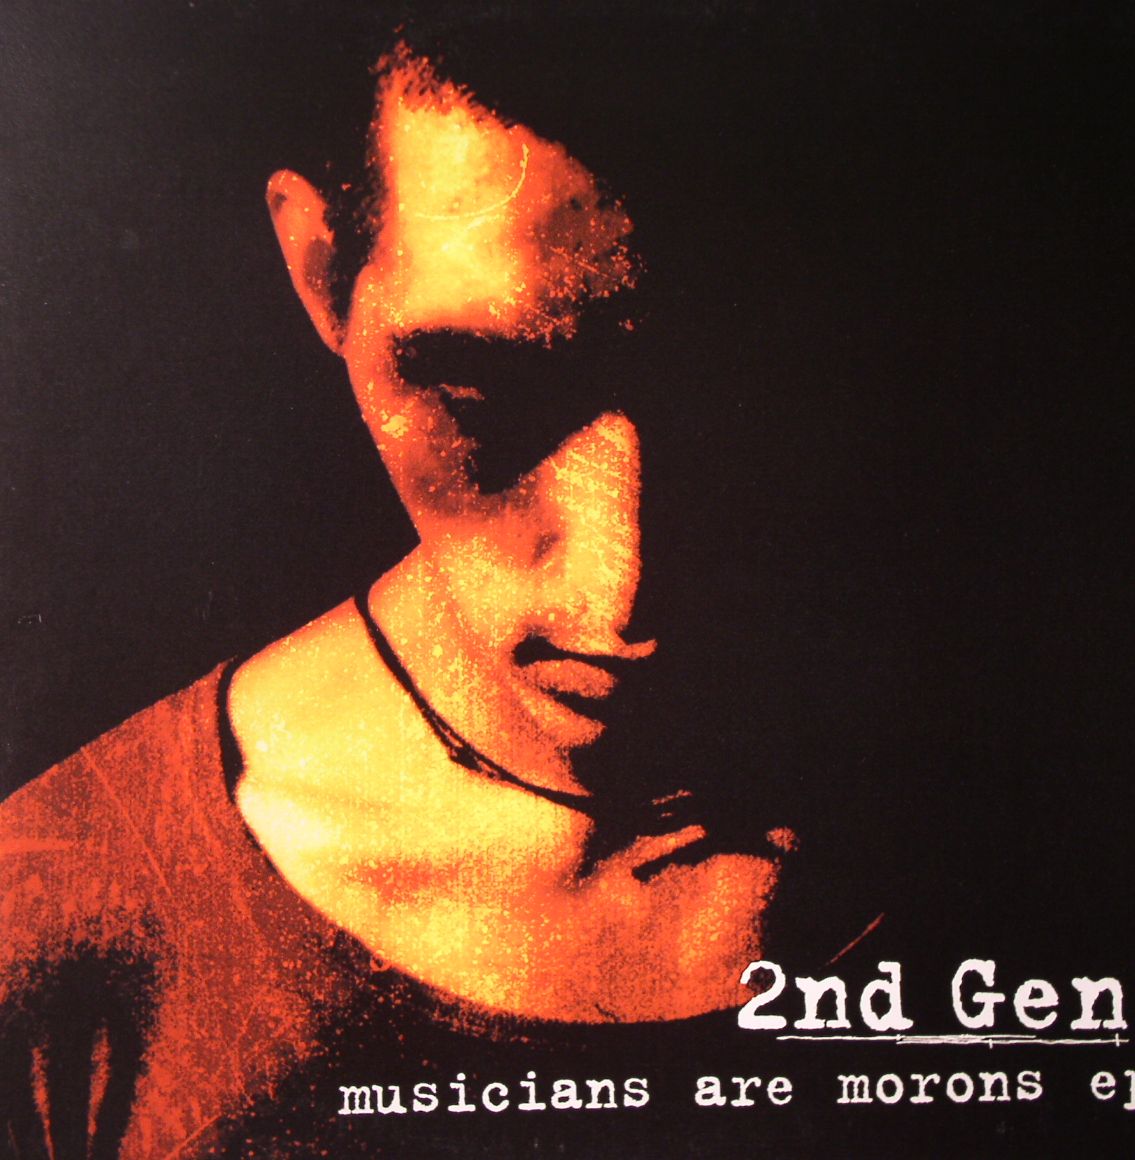 2ND GEN - Musicians Are Morons EP